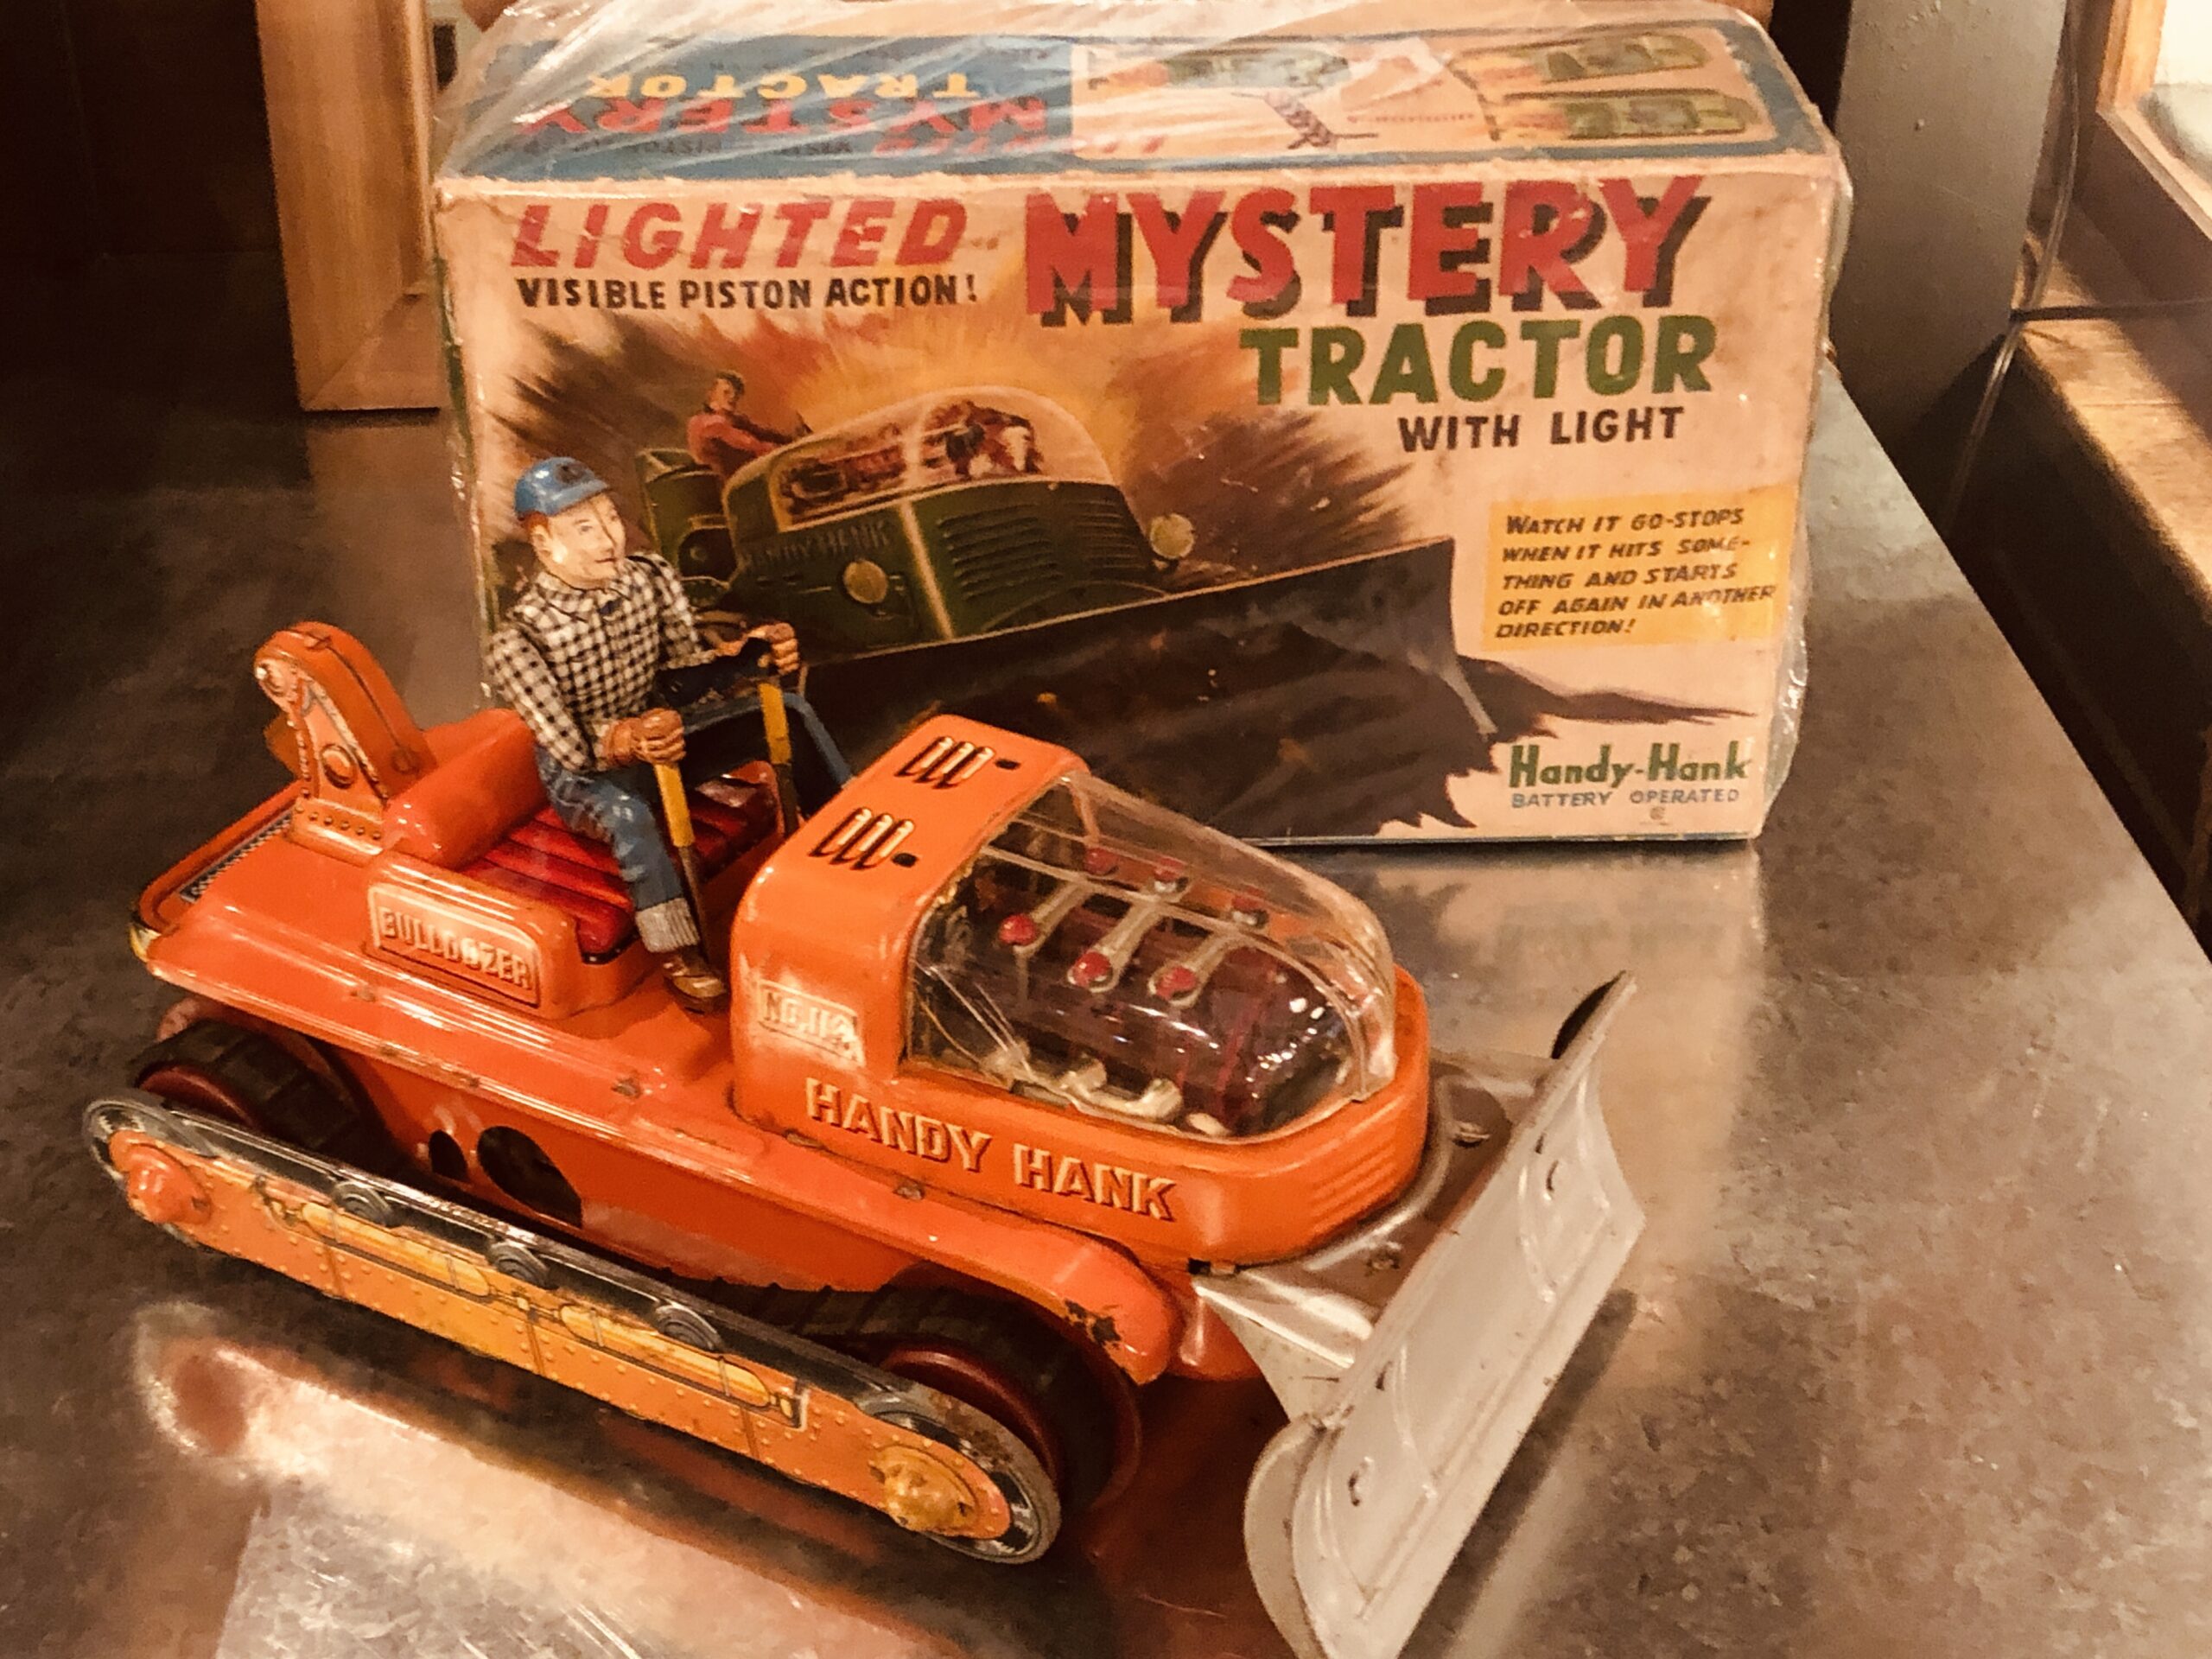 MYSTERY TRACTOR